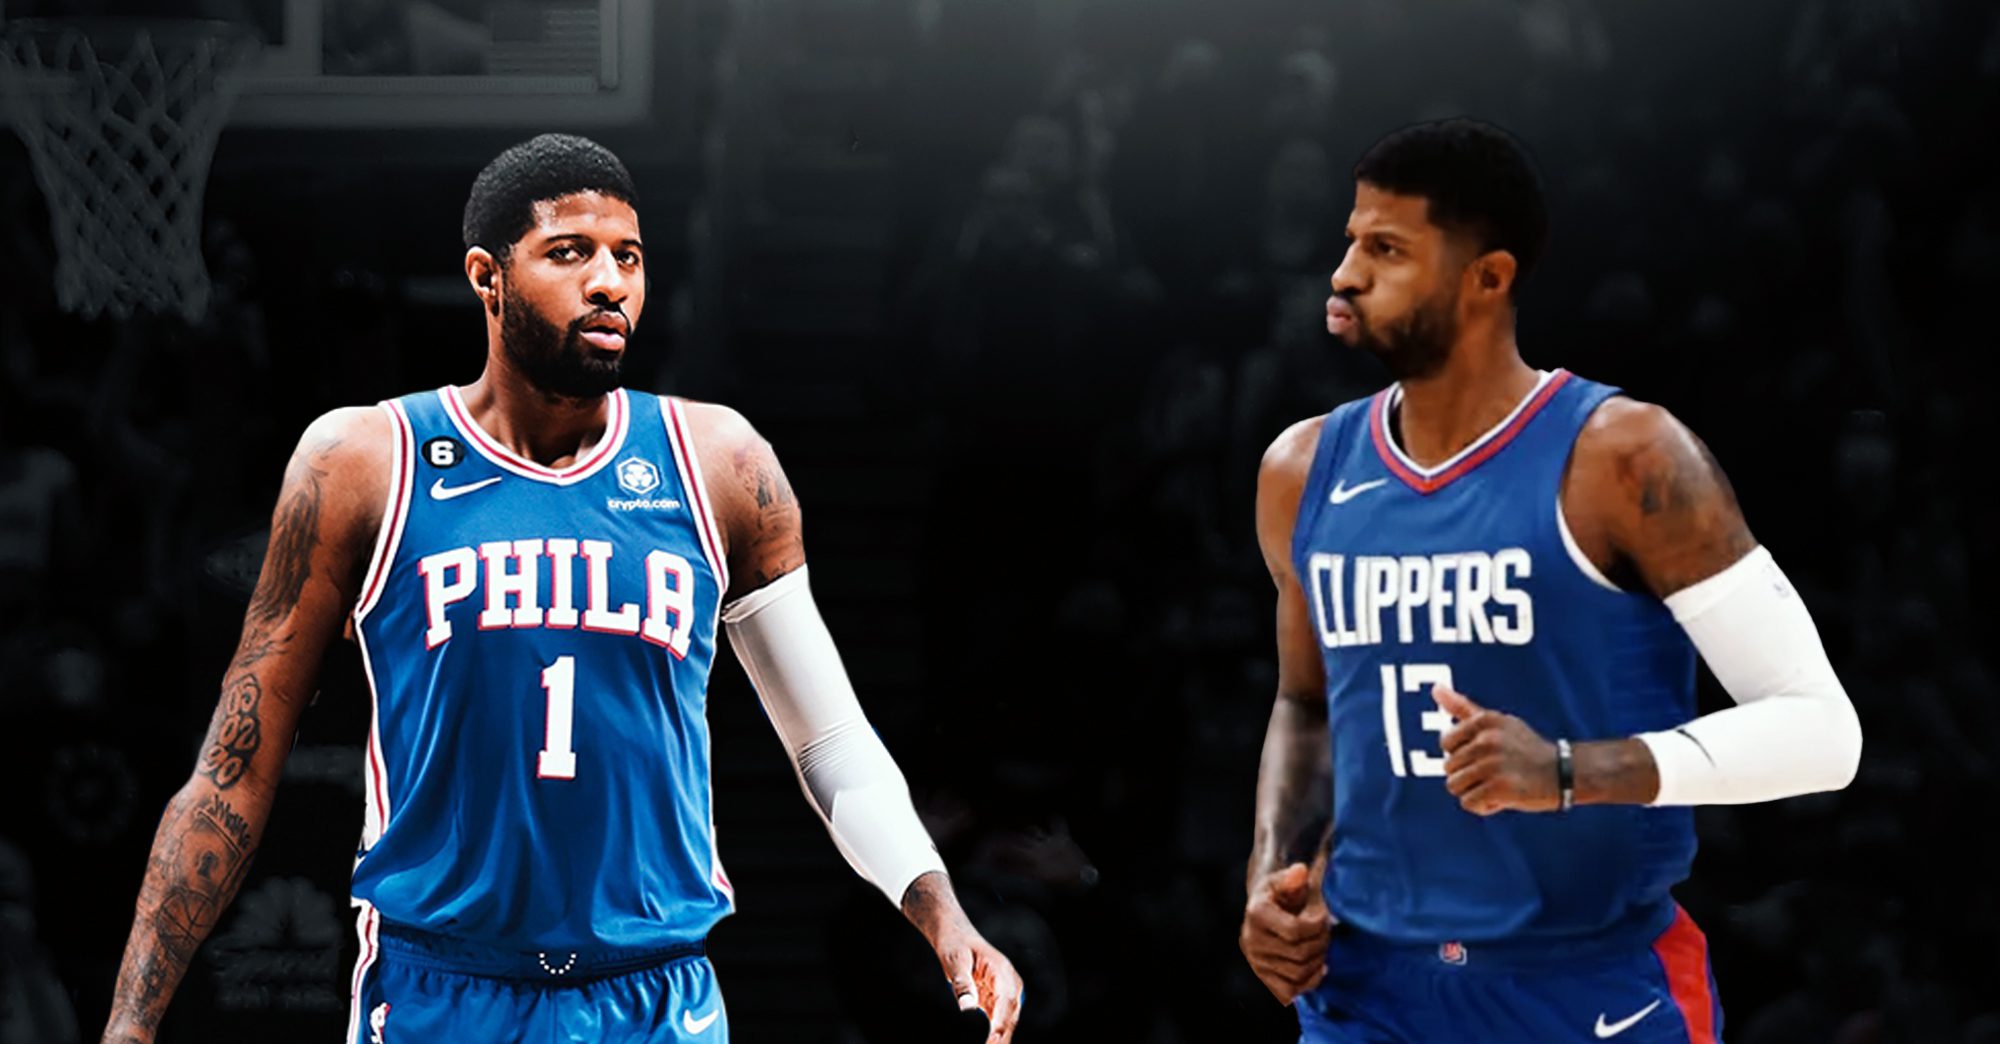 Paul George and the Clippers ‘Apart’ on Contract Extension